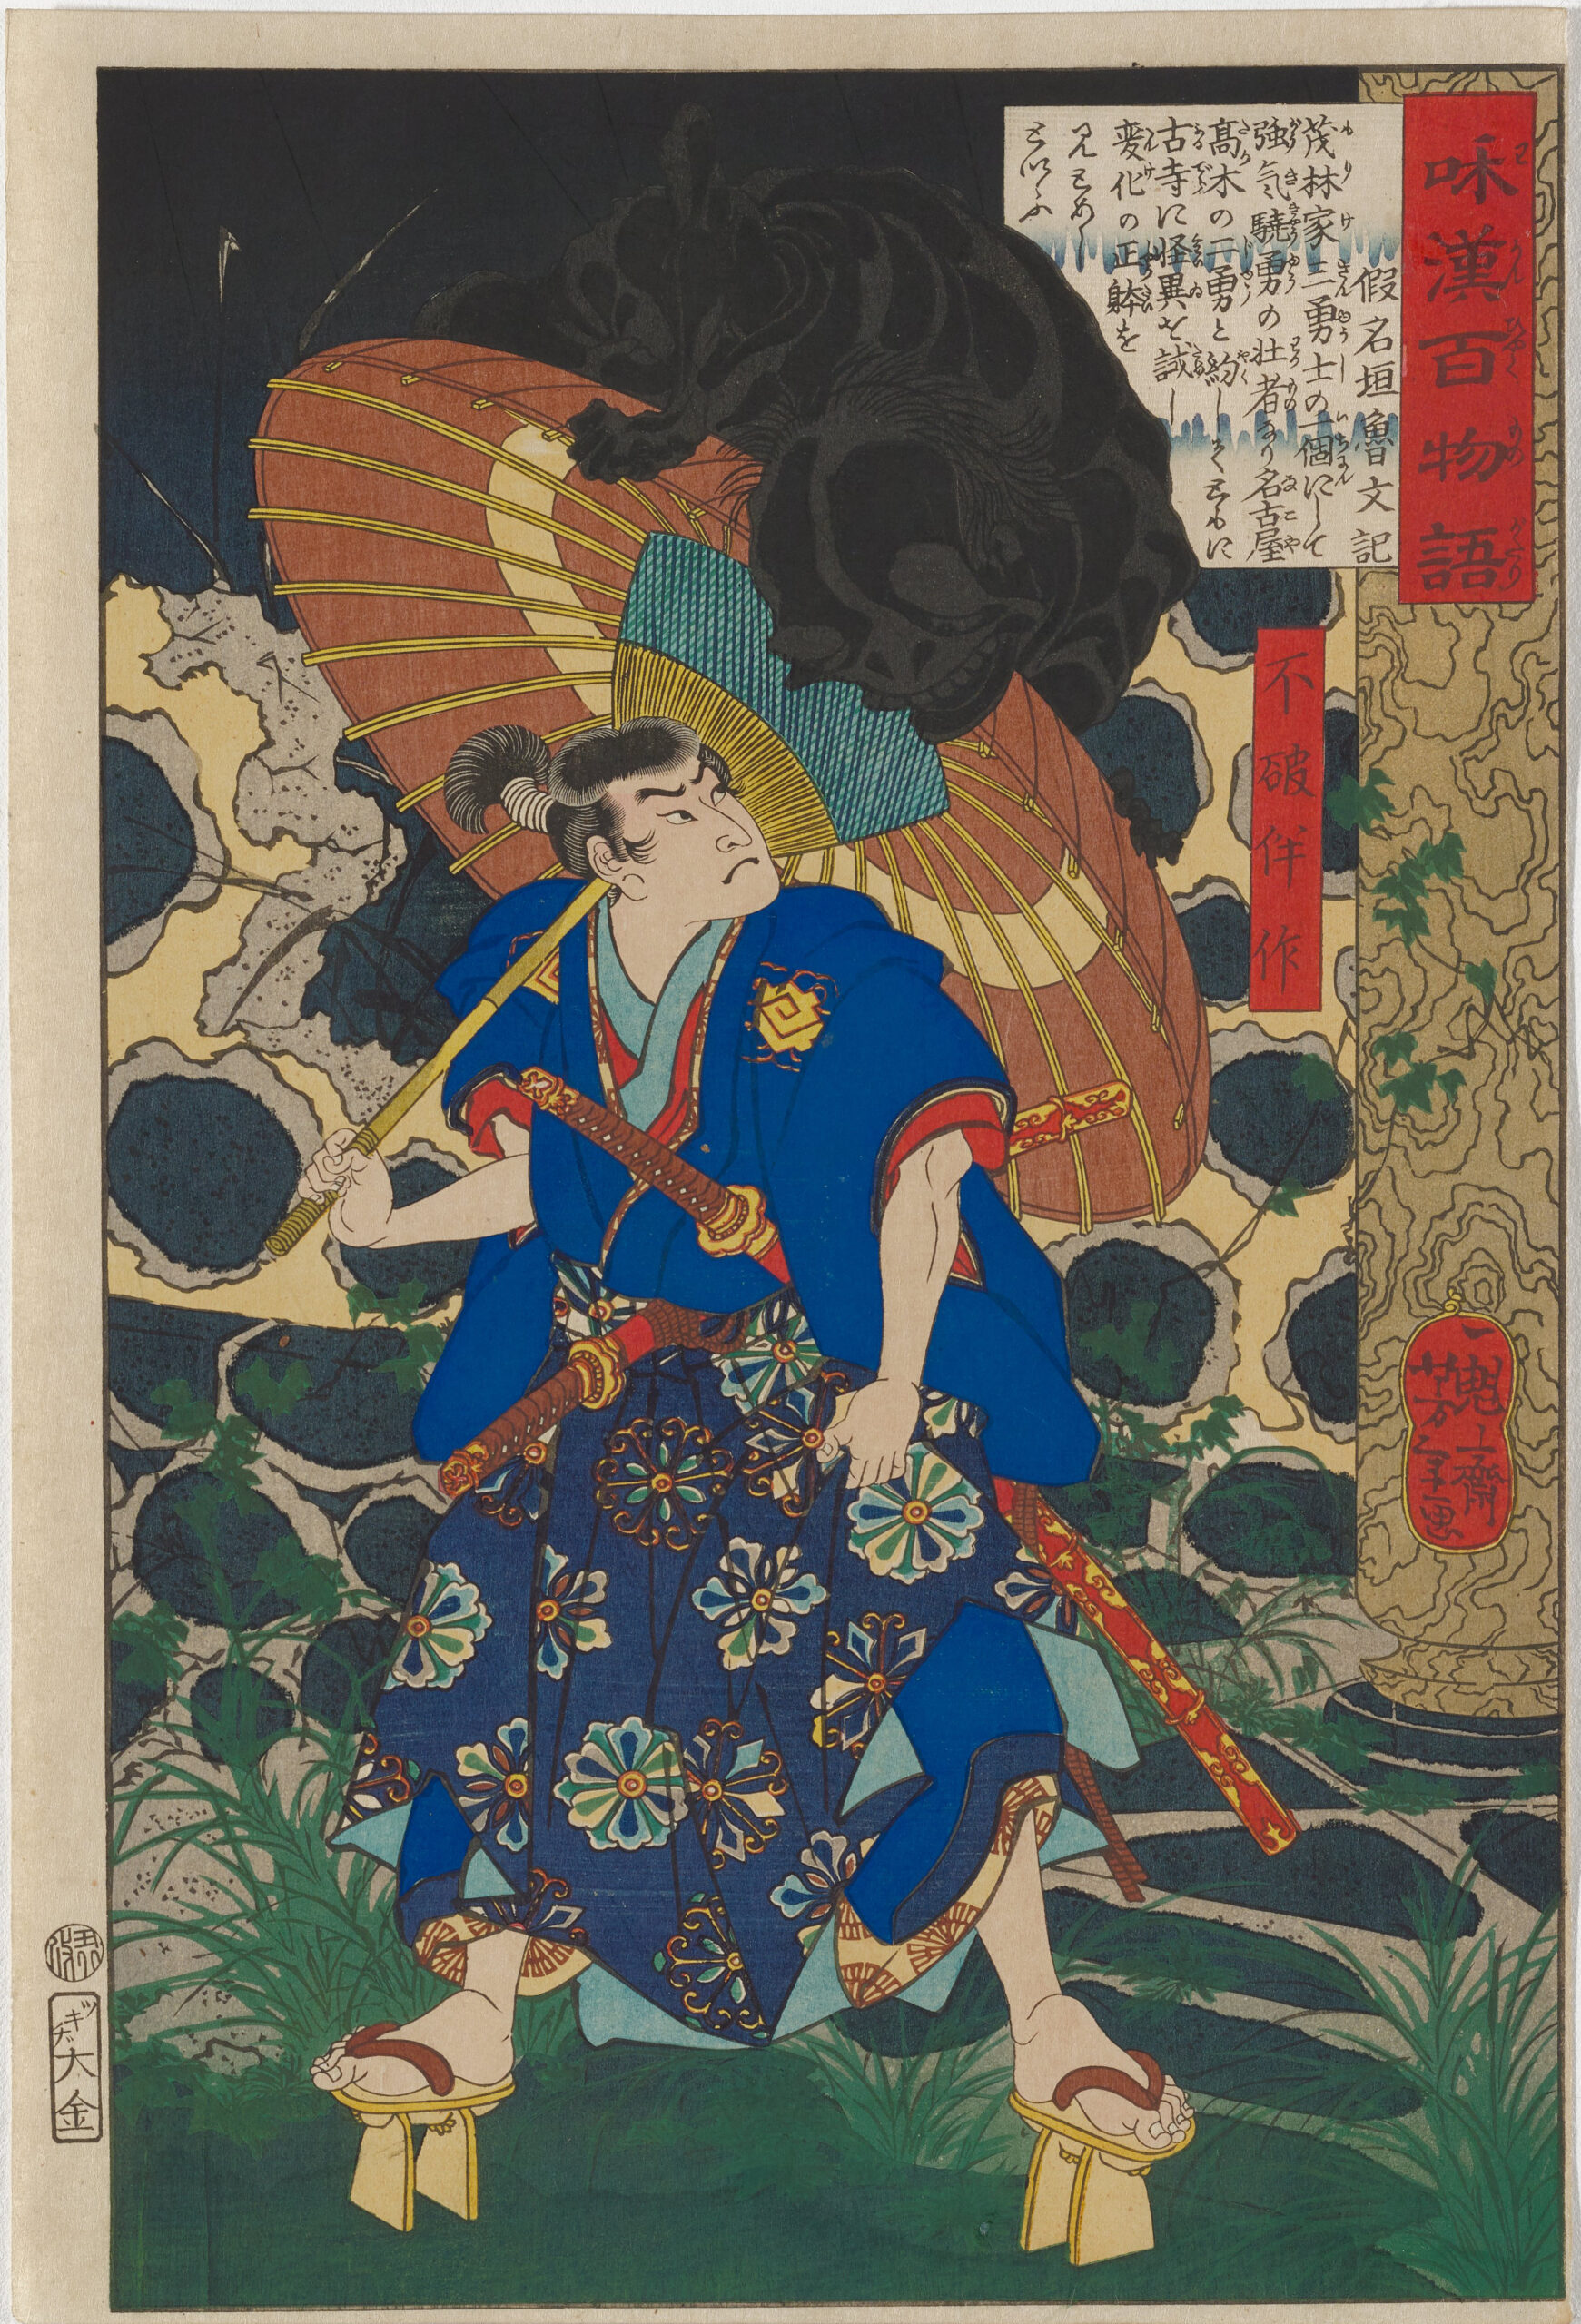 Yoshitoshi - Fuwa Bansaku in ruined temple with black monster on umbrella - One hundred ghost stories of China and Japan